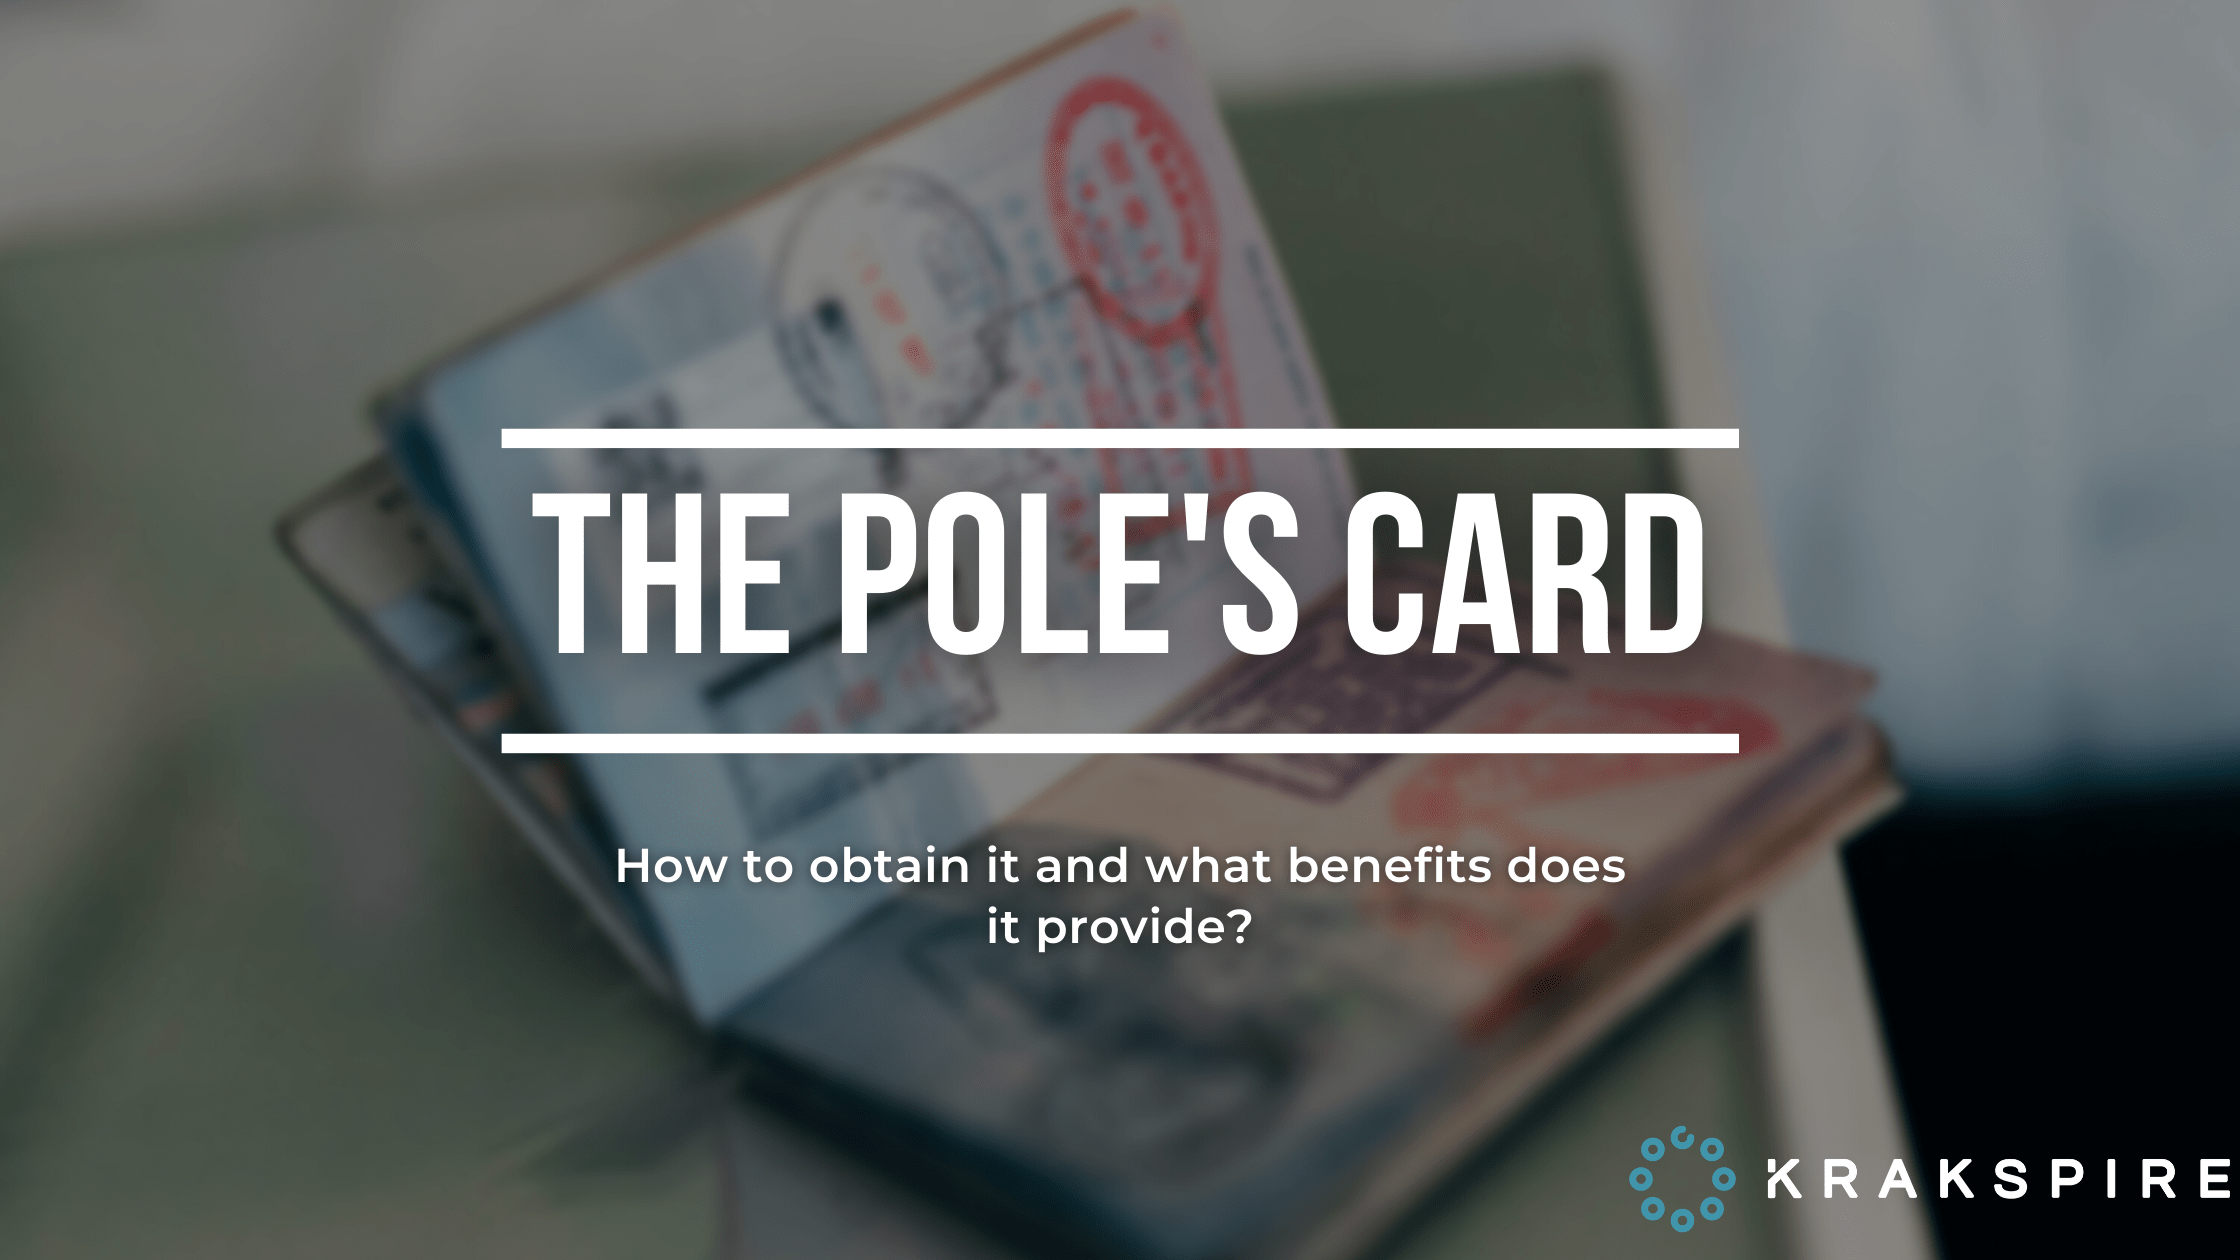 The Pole's Card - how to obtain it and what benefits does it provide?